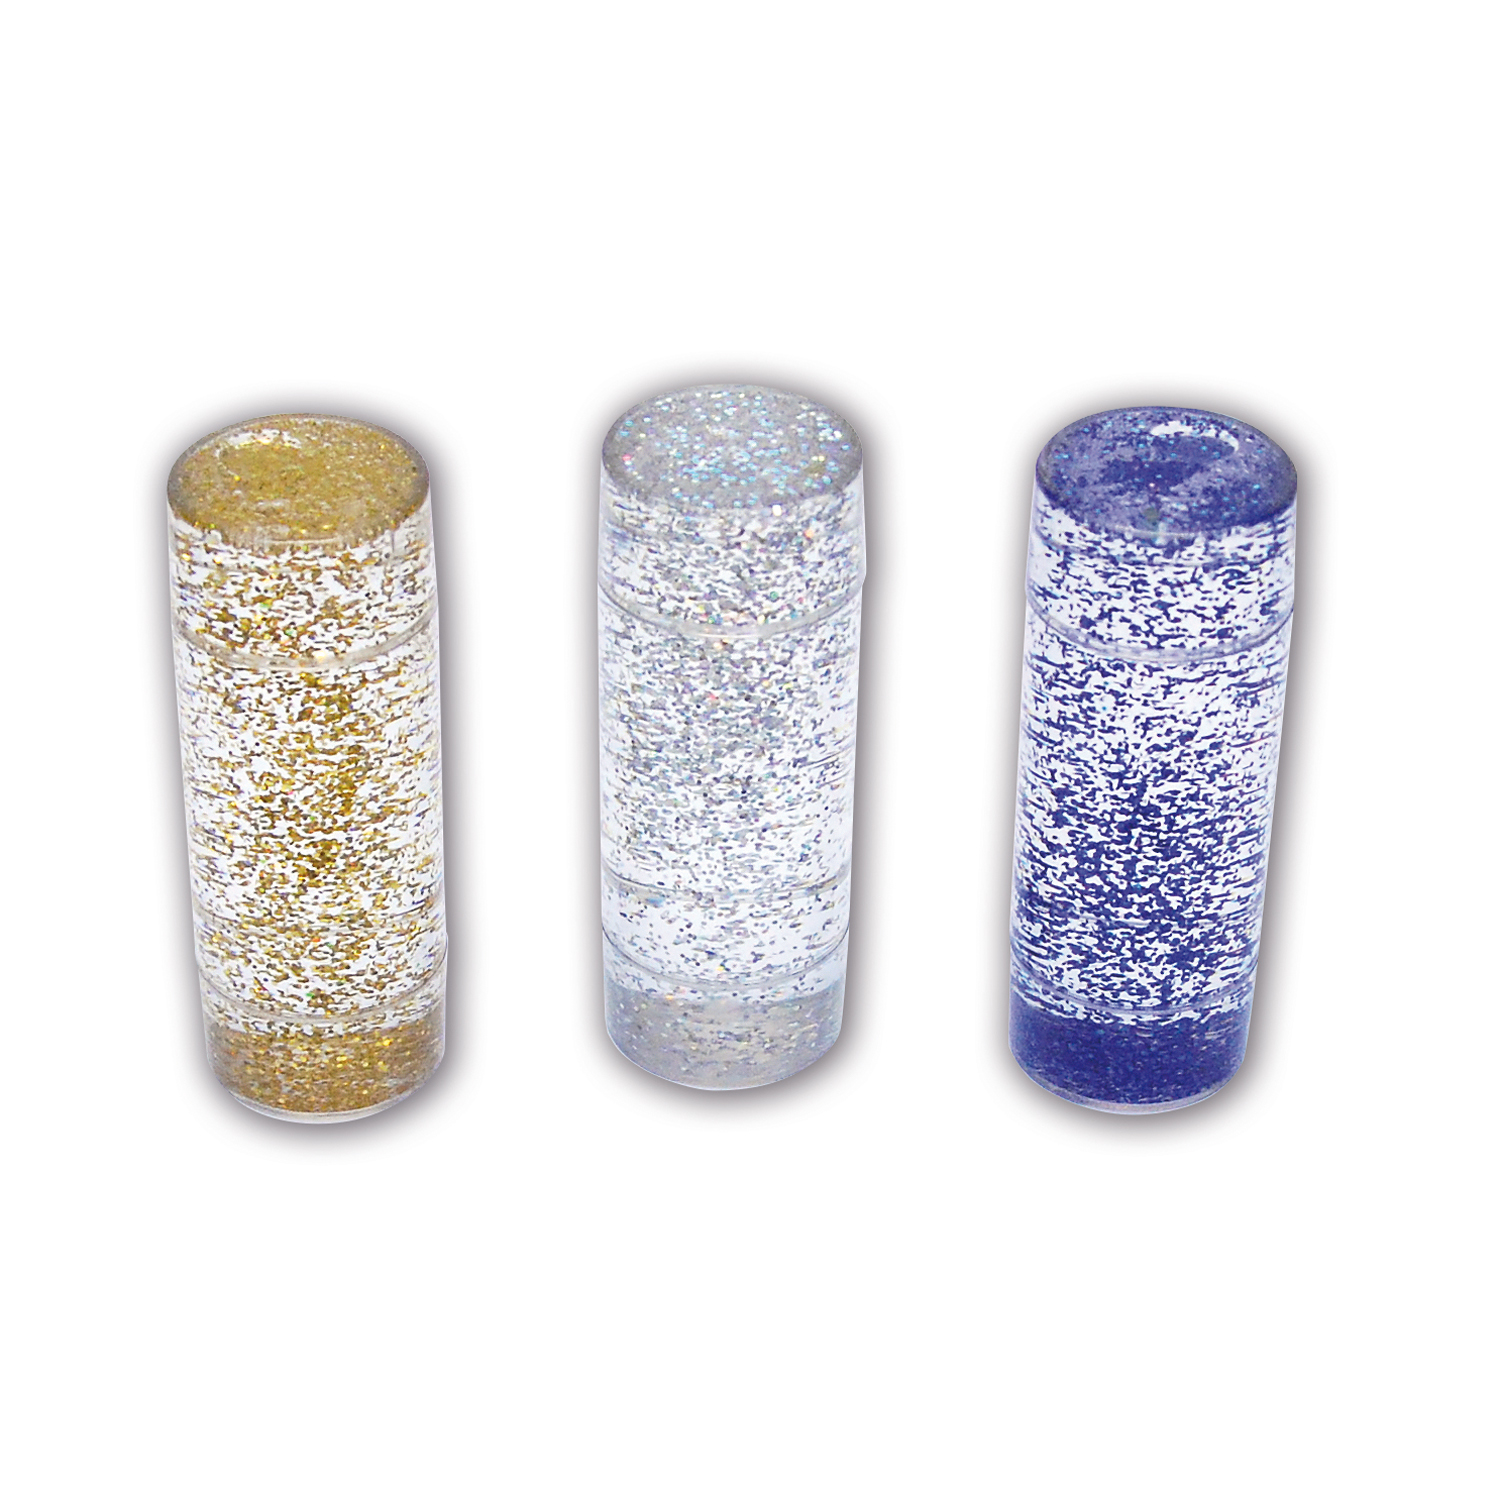 TickiT Sensory Glitter Storm - Set of 3 - Blue, Silver, Gold image number null